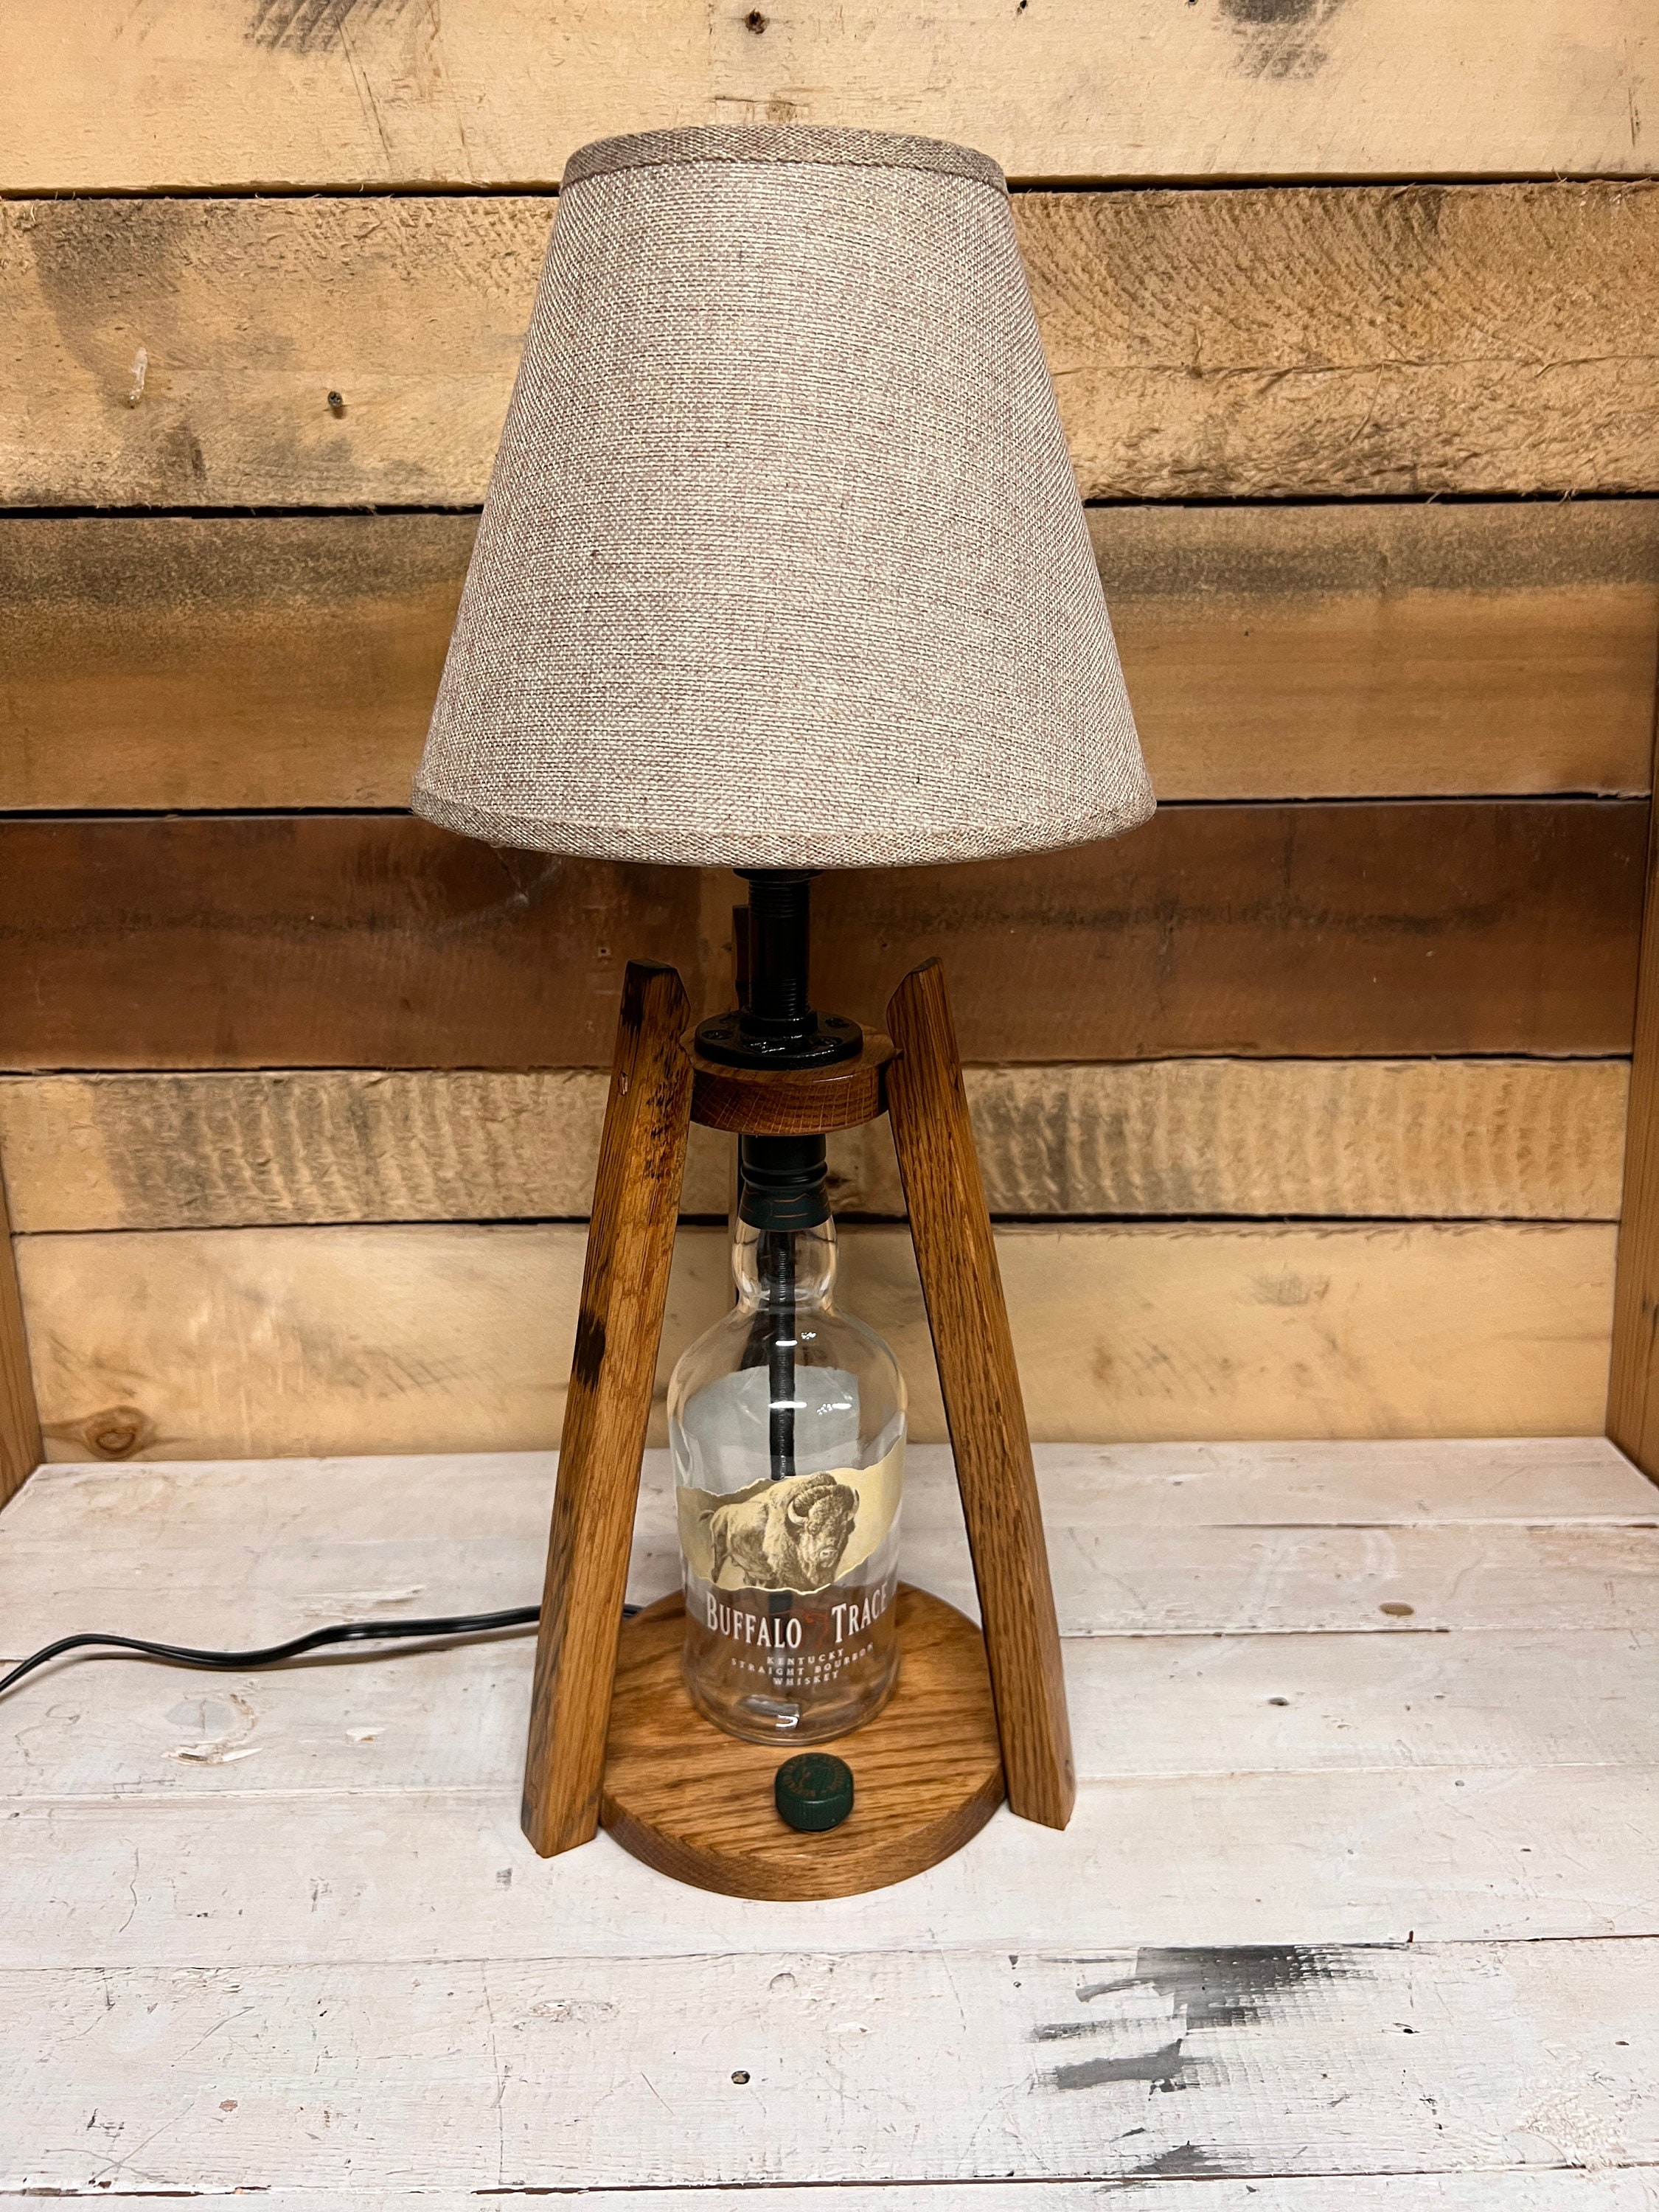 Make-A-Lamp Kit With All Parts & Instructions for DIY Lamp Or Repair H-77